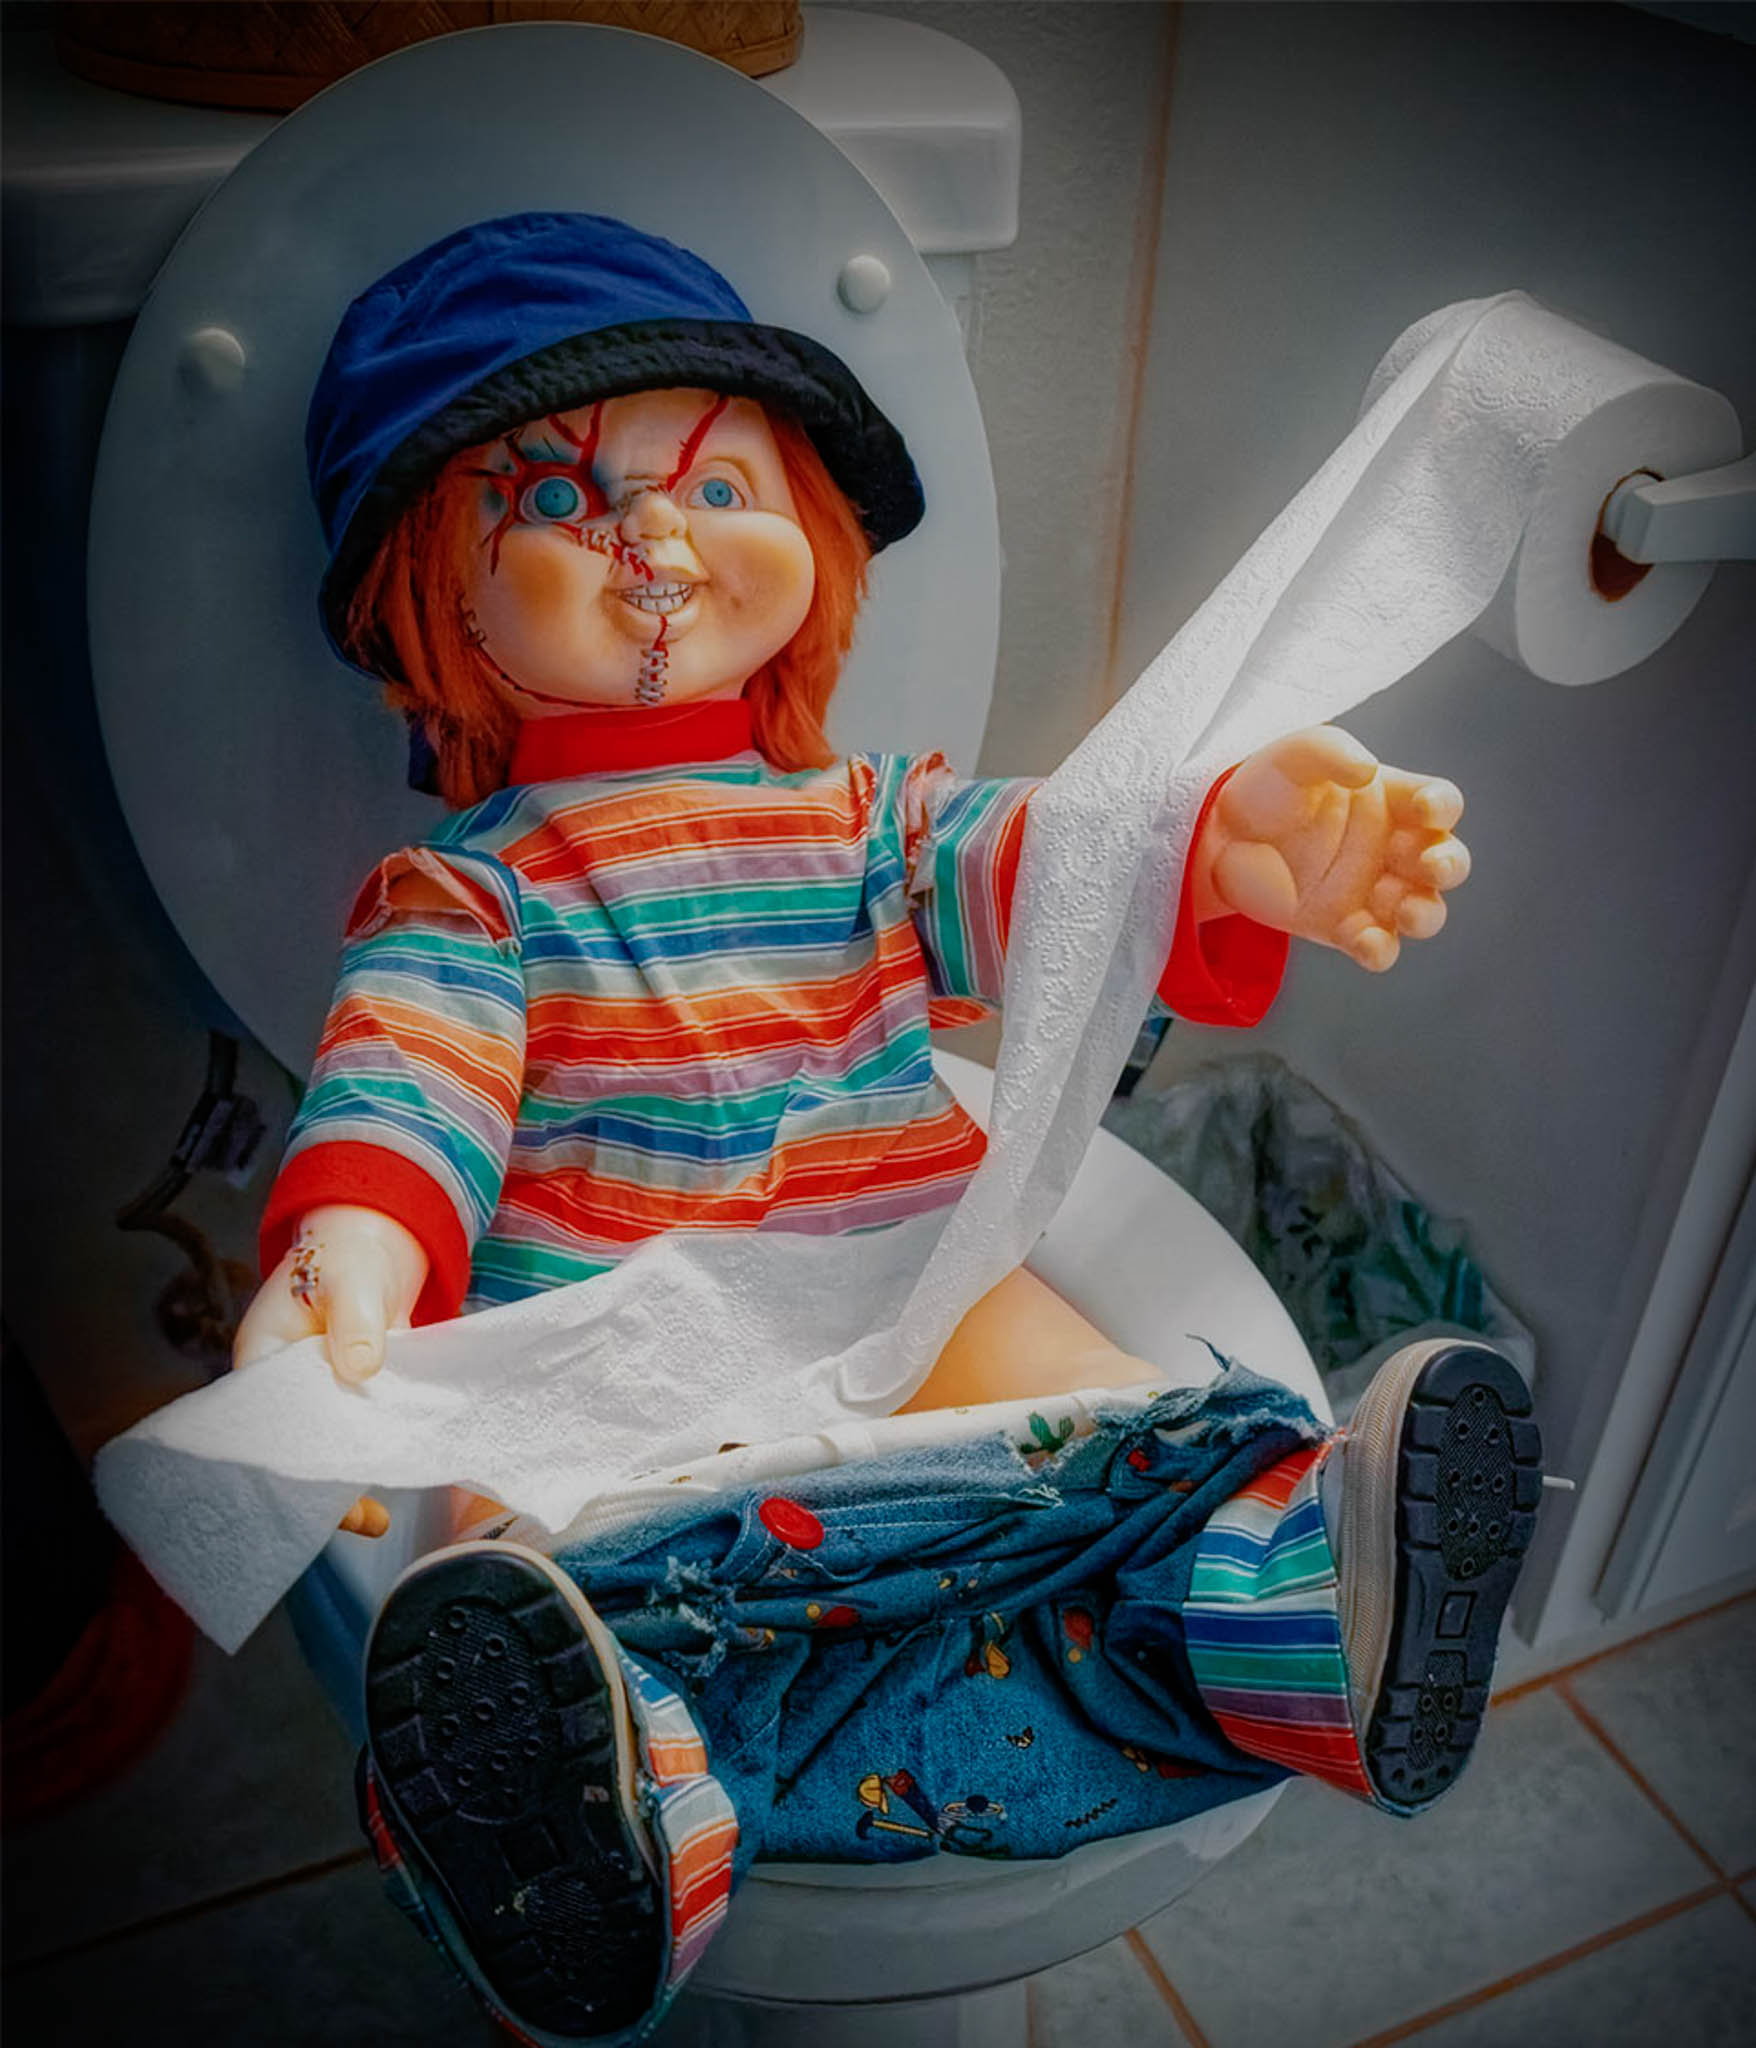 Chucky on the toilet, Andrea Savage photographer, Photography Scavenger Hunt